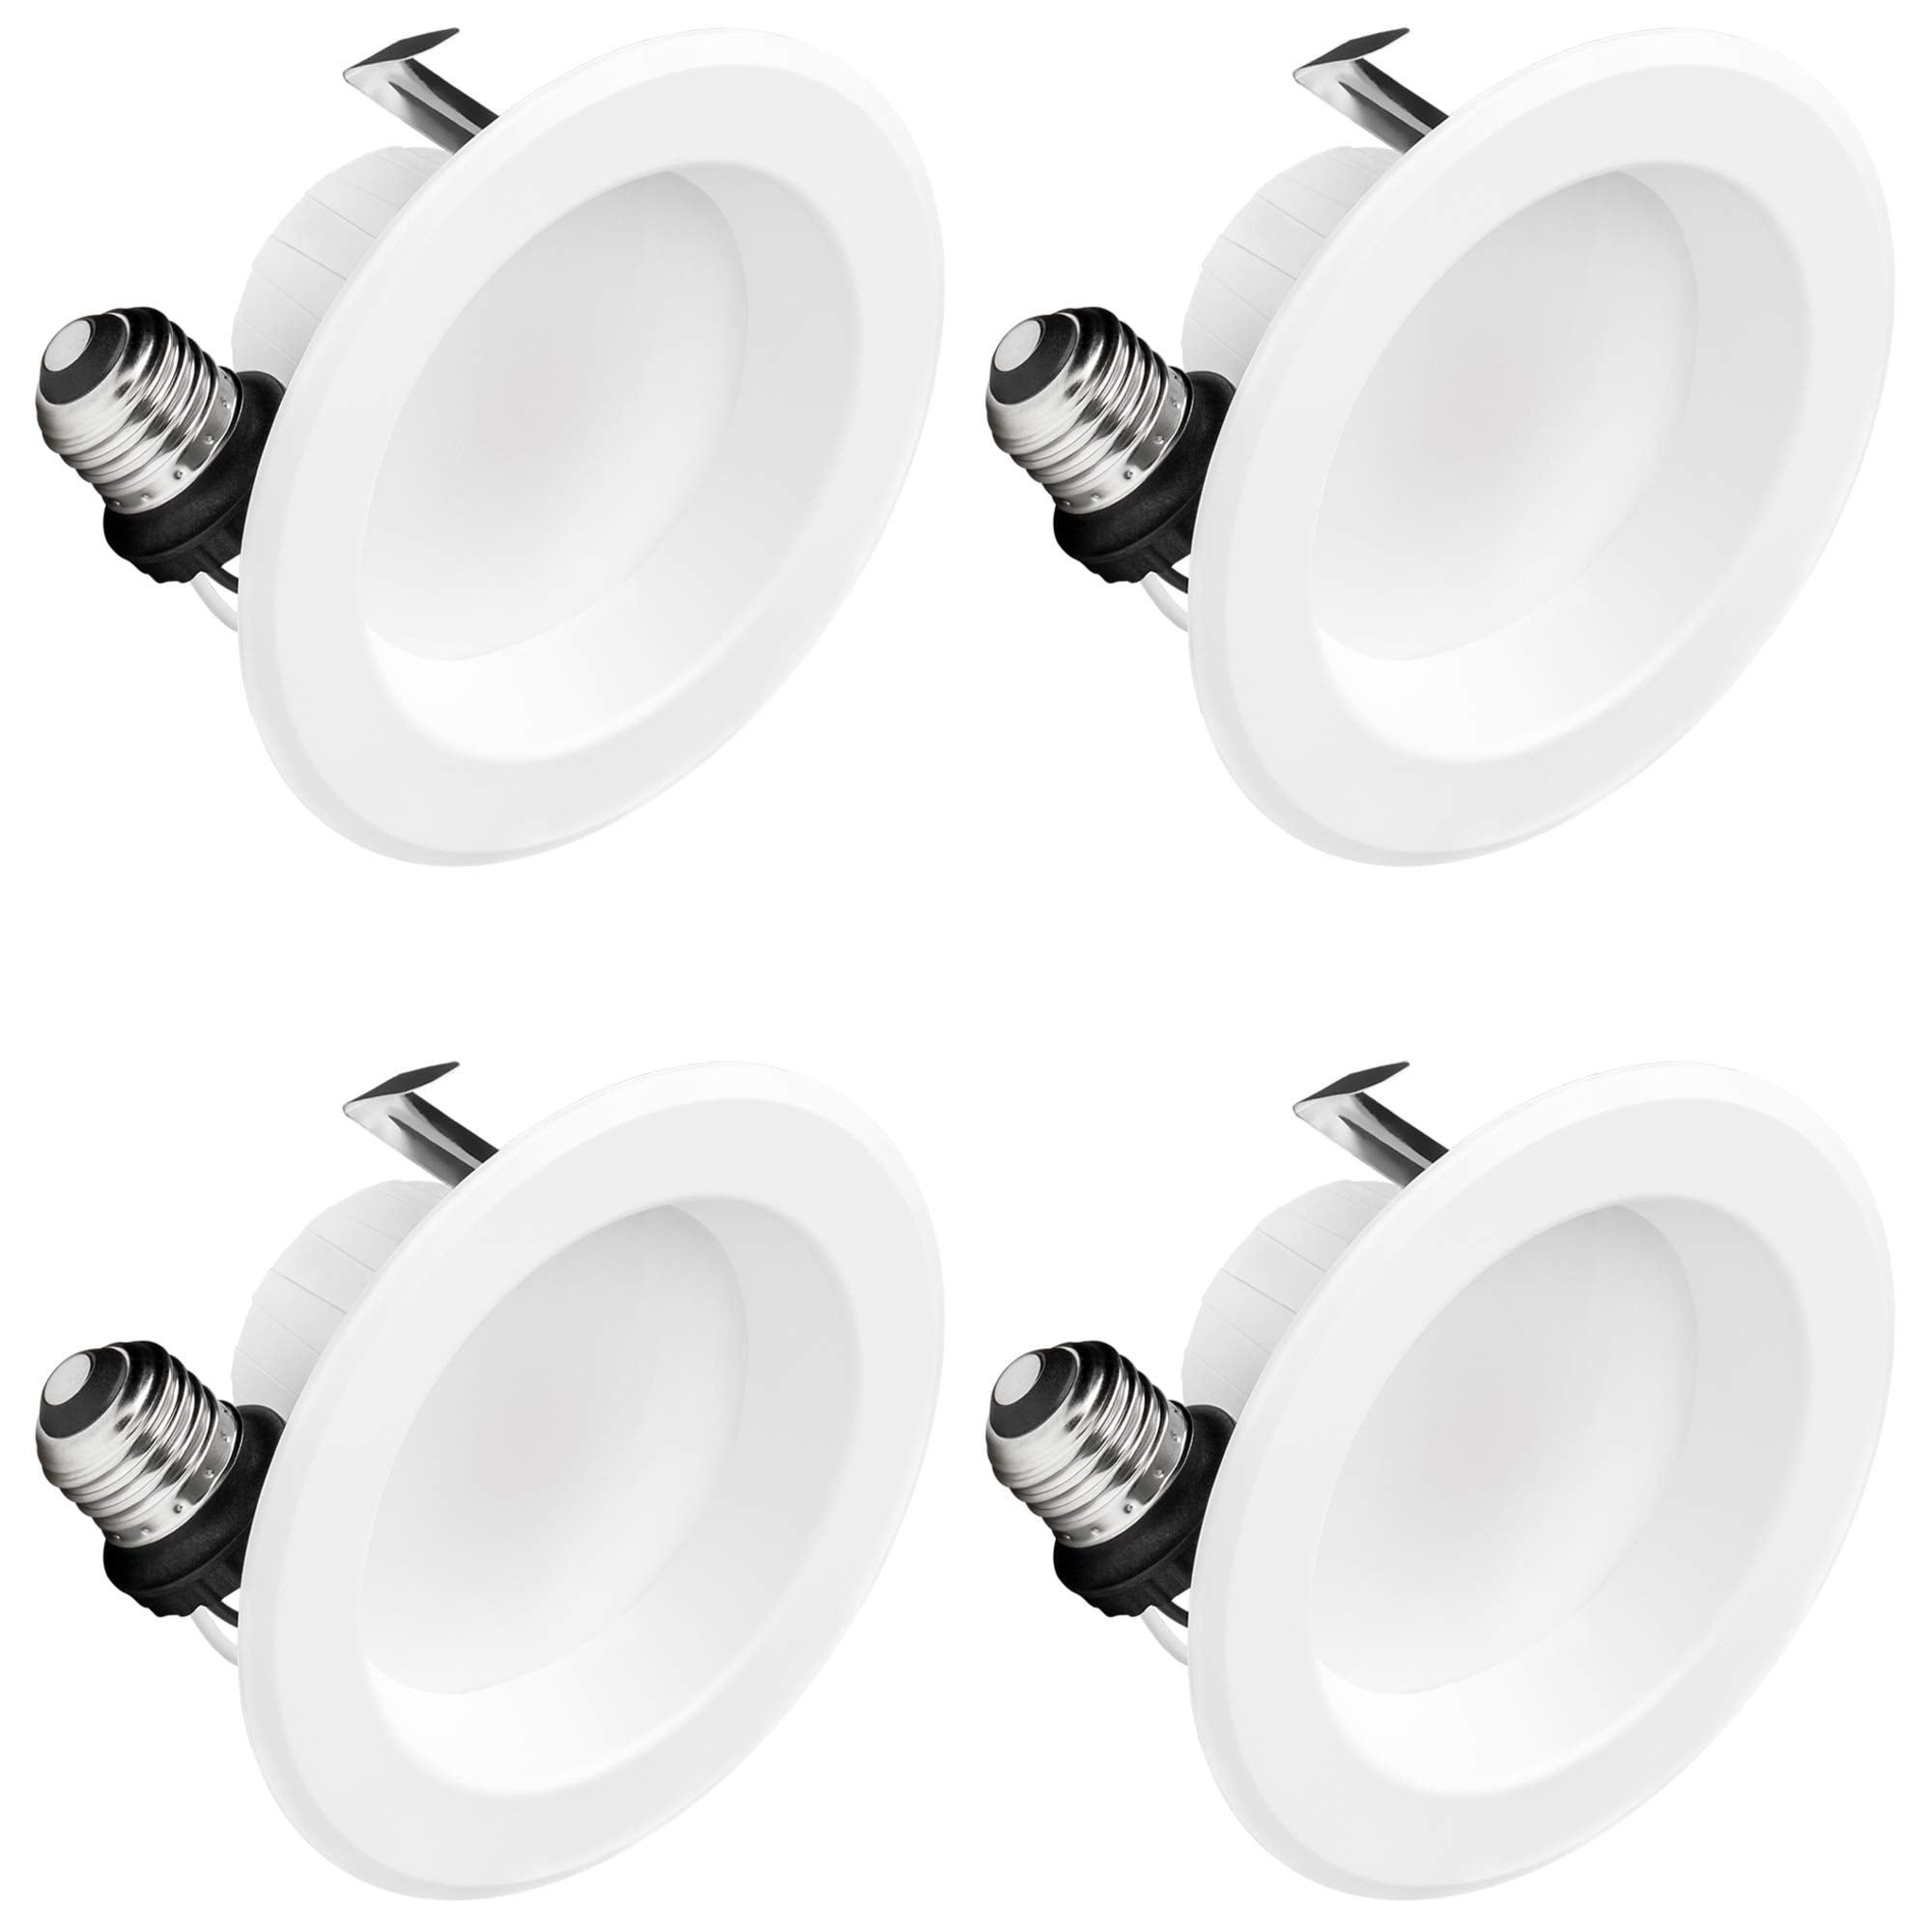 Dimmable Downlight 9W=65W 12 Pack Energy Star Hyperikon 4 Inch LED Recessed Lighting UL Daylight White